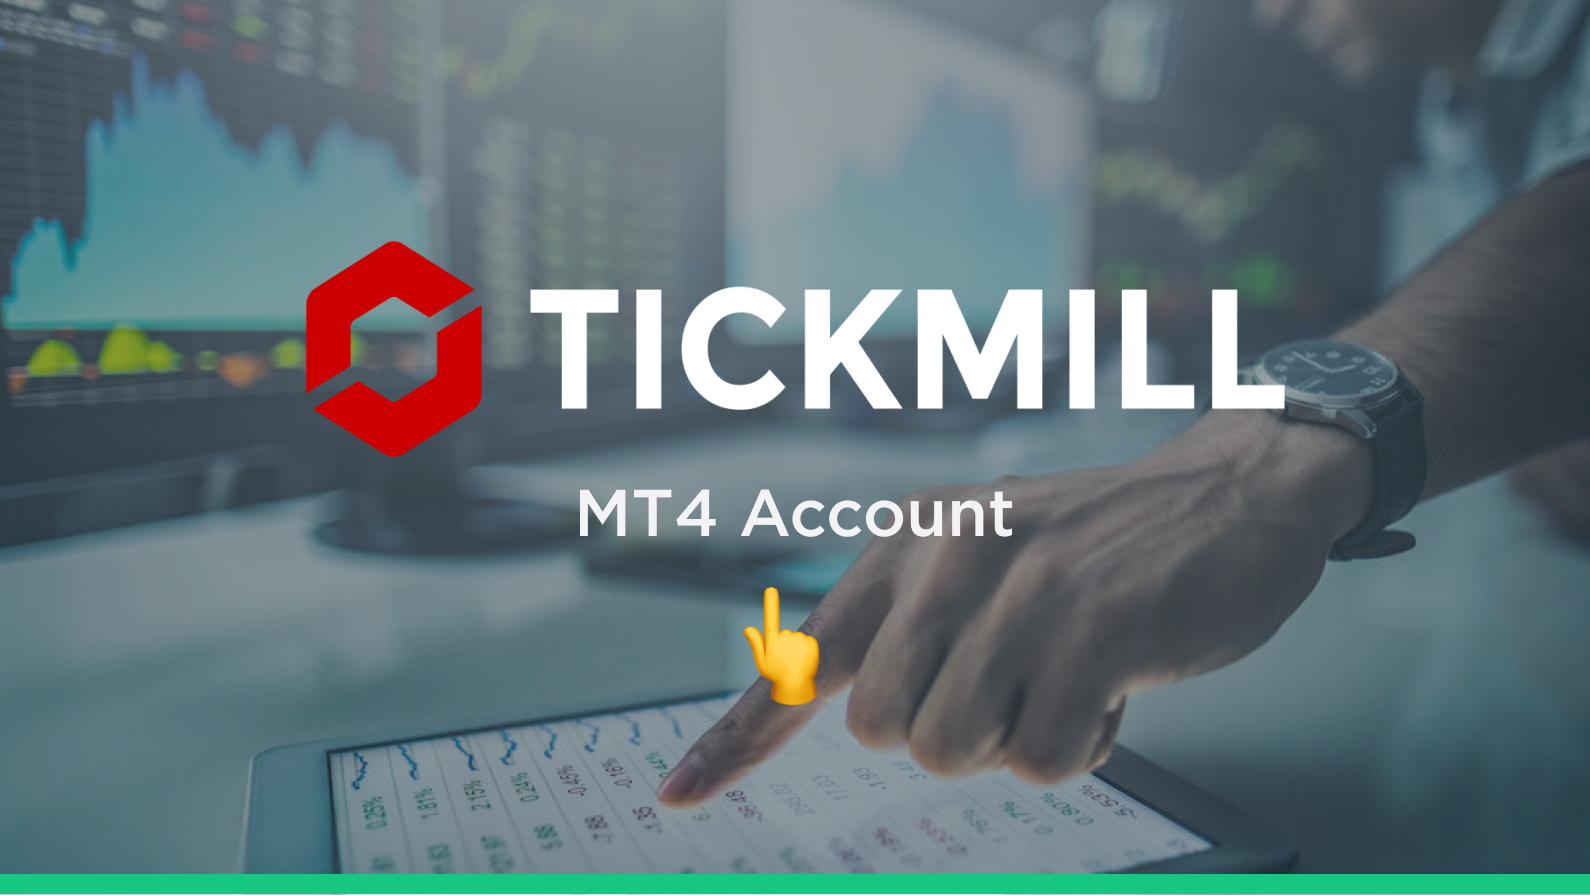 How to Open a Tickmill MT4 Account – A Step-by-step Guide